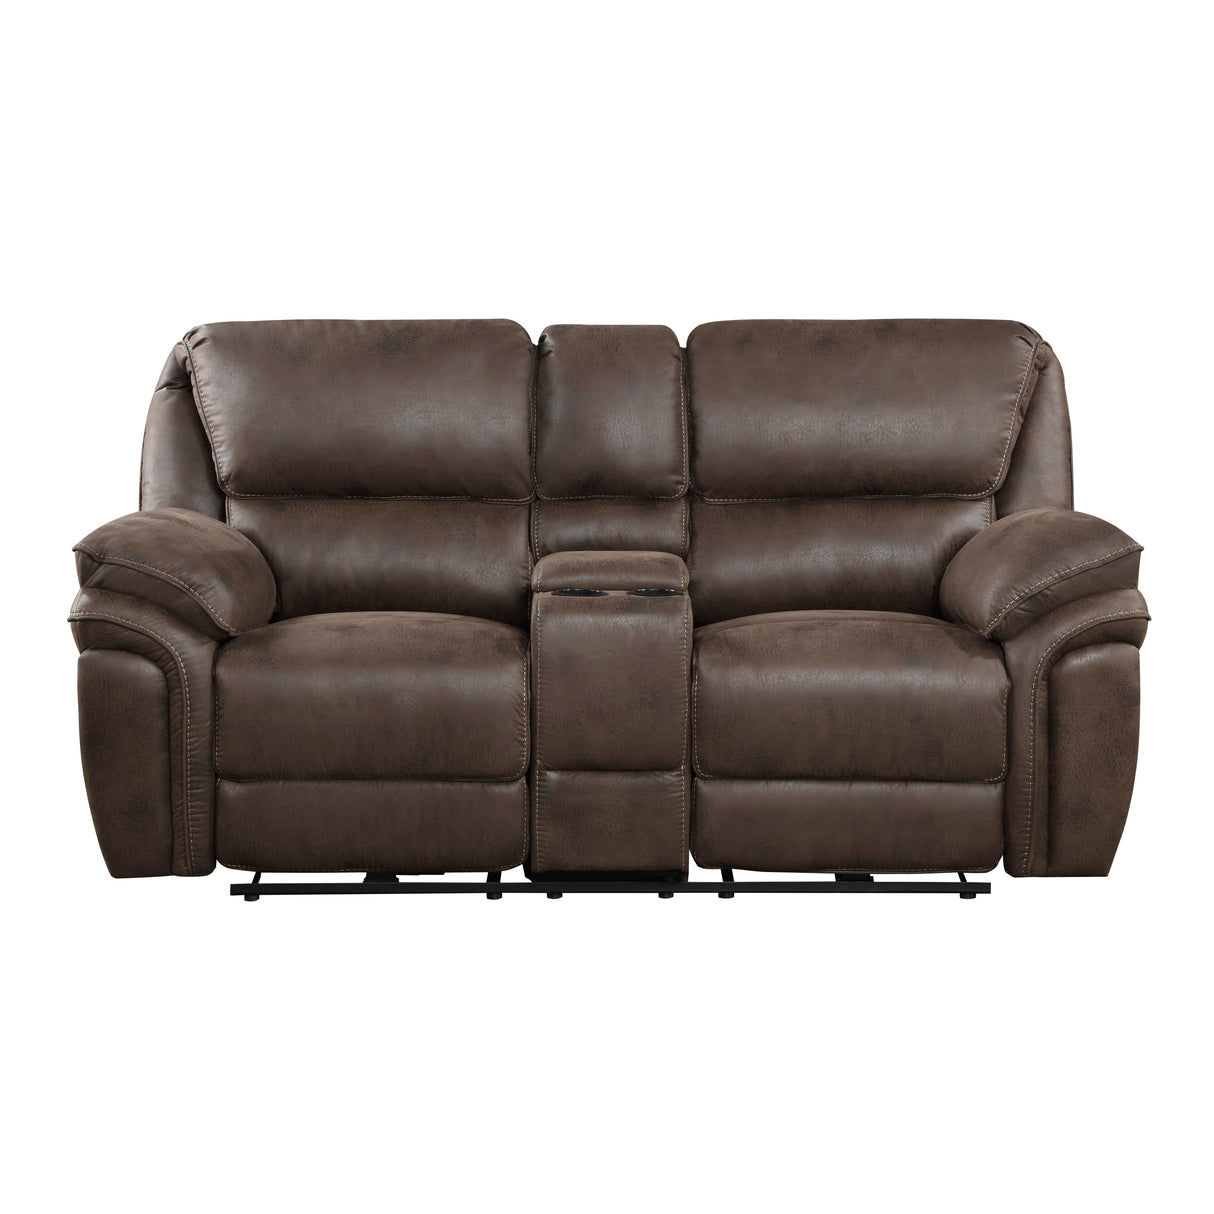 Proctor Brown Microfiber Power Double Reclining Love Seat with Center Console